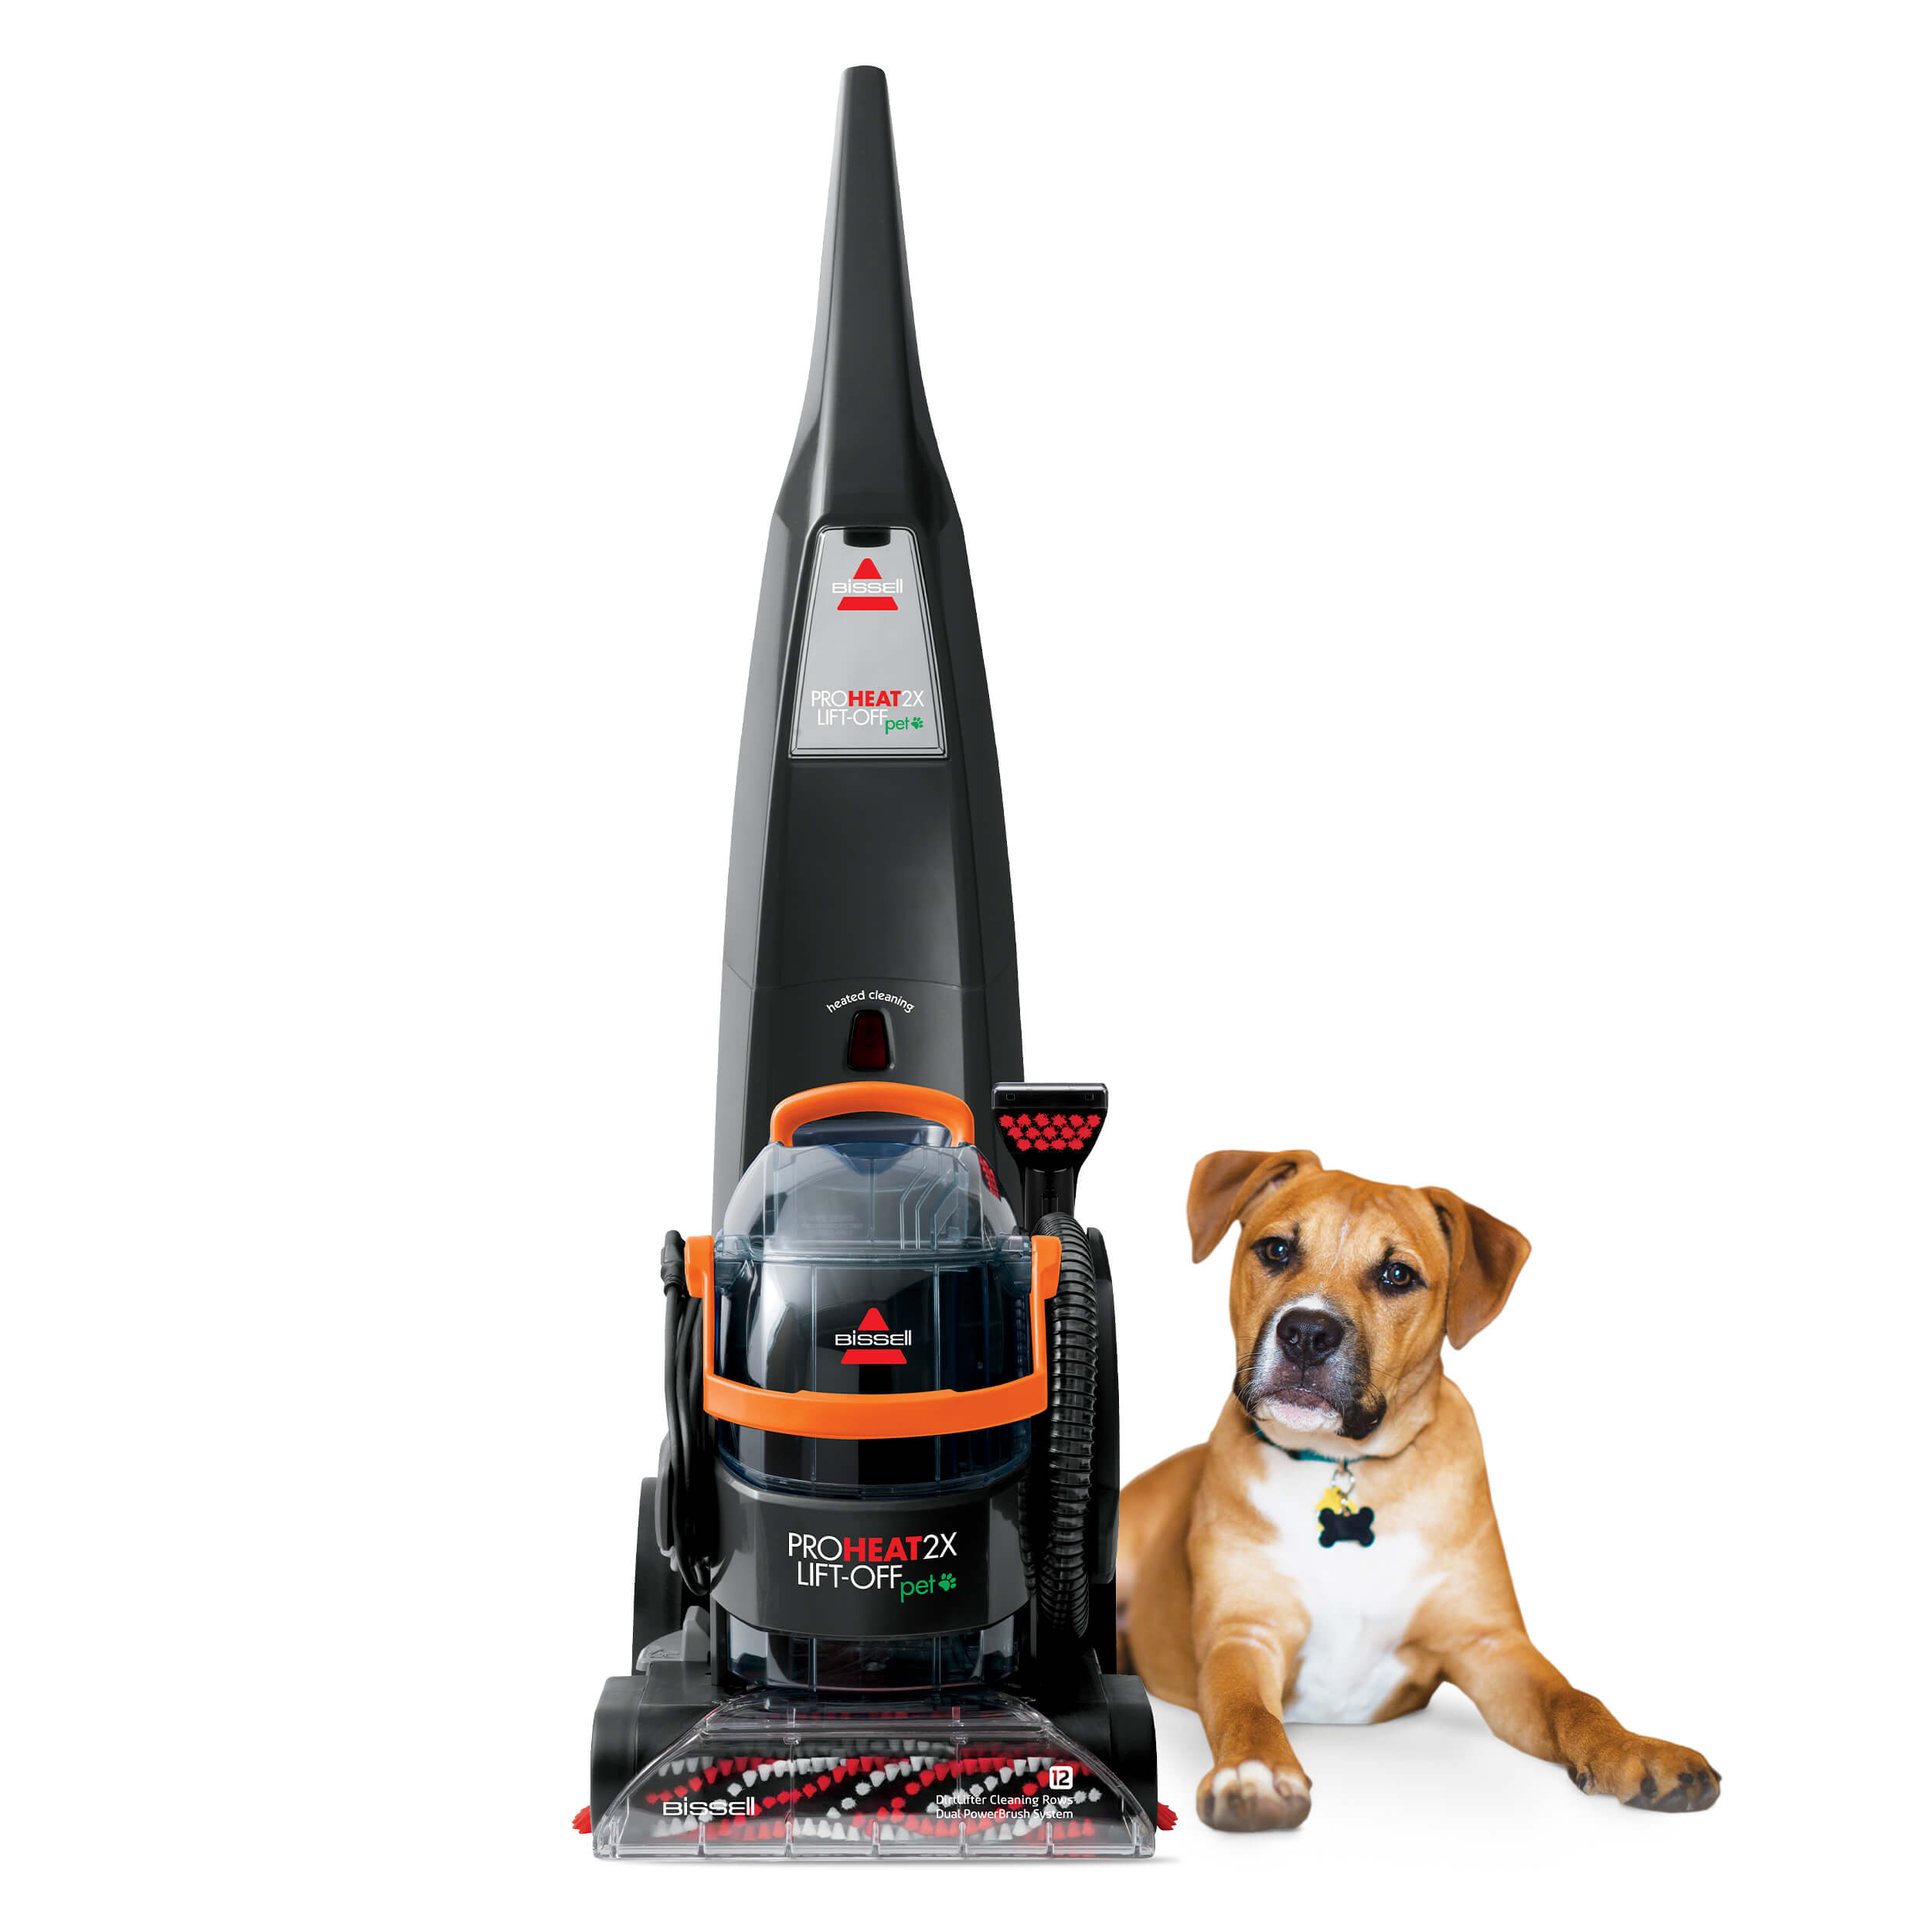 Pawsitively Clean(R) Carpet Cleaning Rental Machine